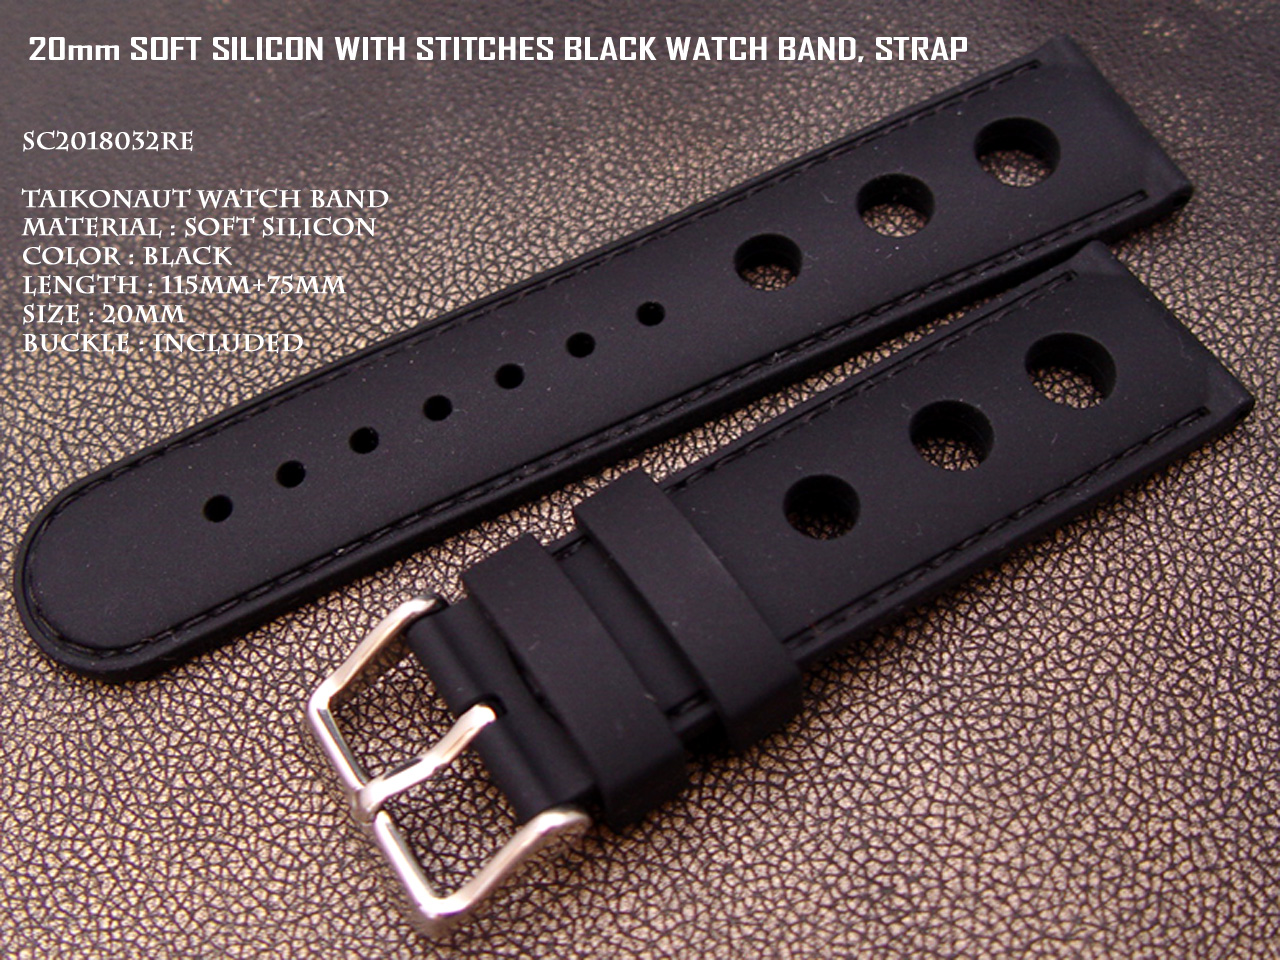 20mm Black Soft Silicone Diver Watch Band Hole Punch Watch Band Red Stitches